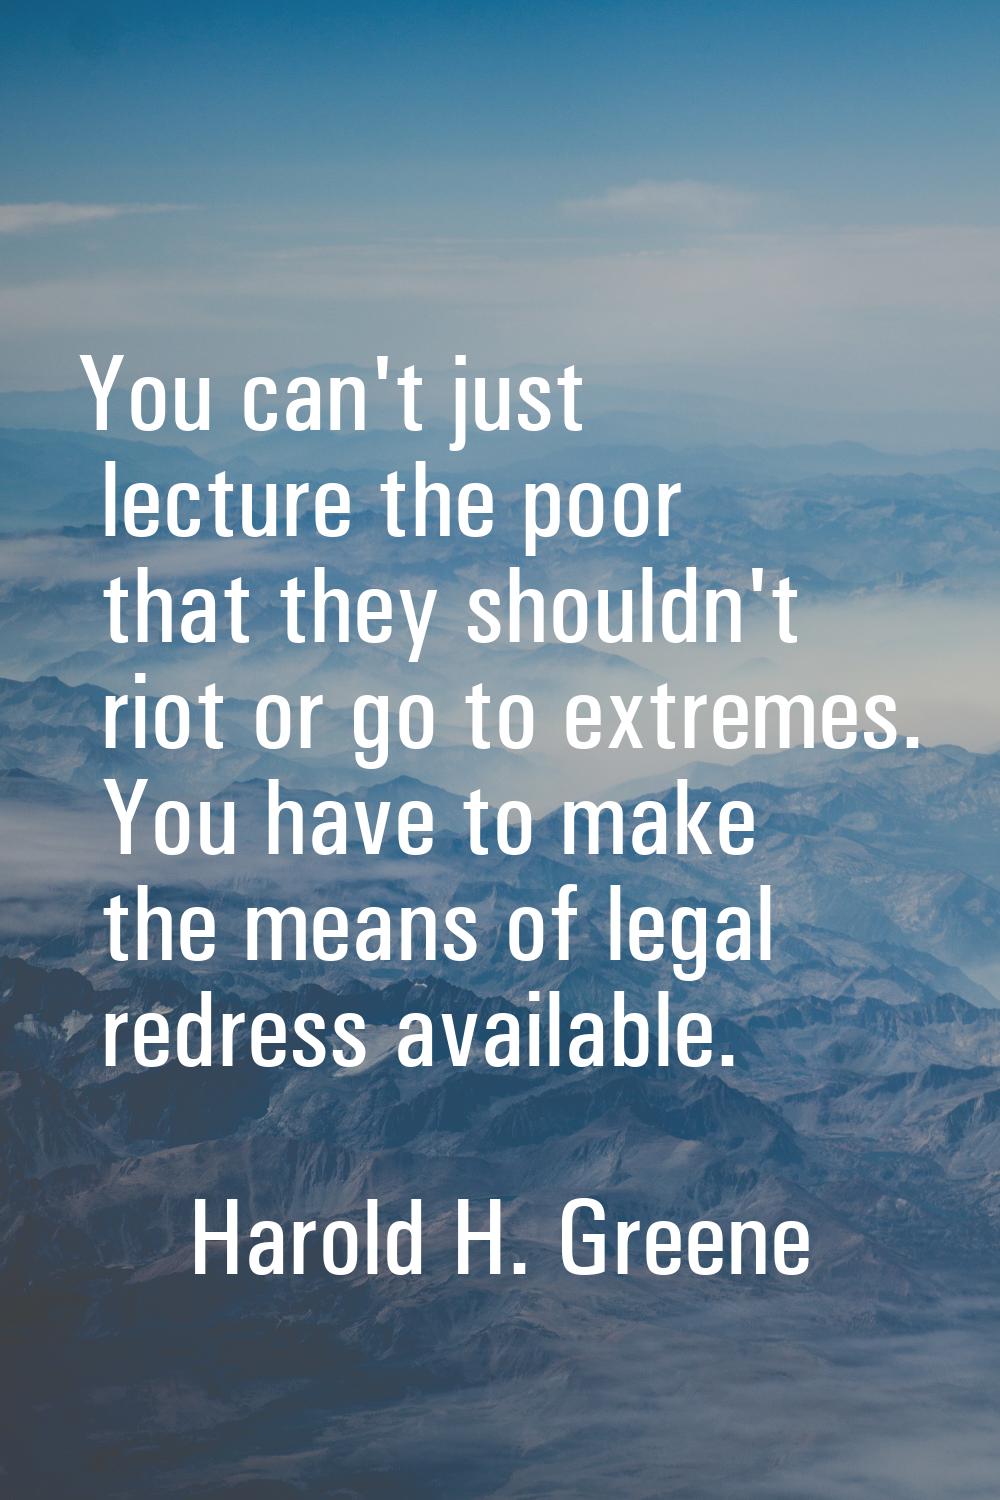 You can't just lecture the poor that they shouldn't riot or go to extremes. You have to make the me